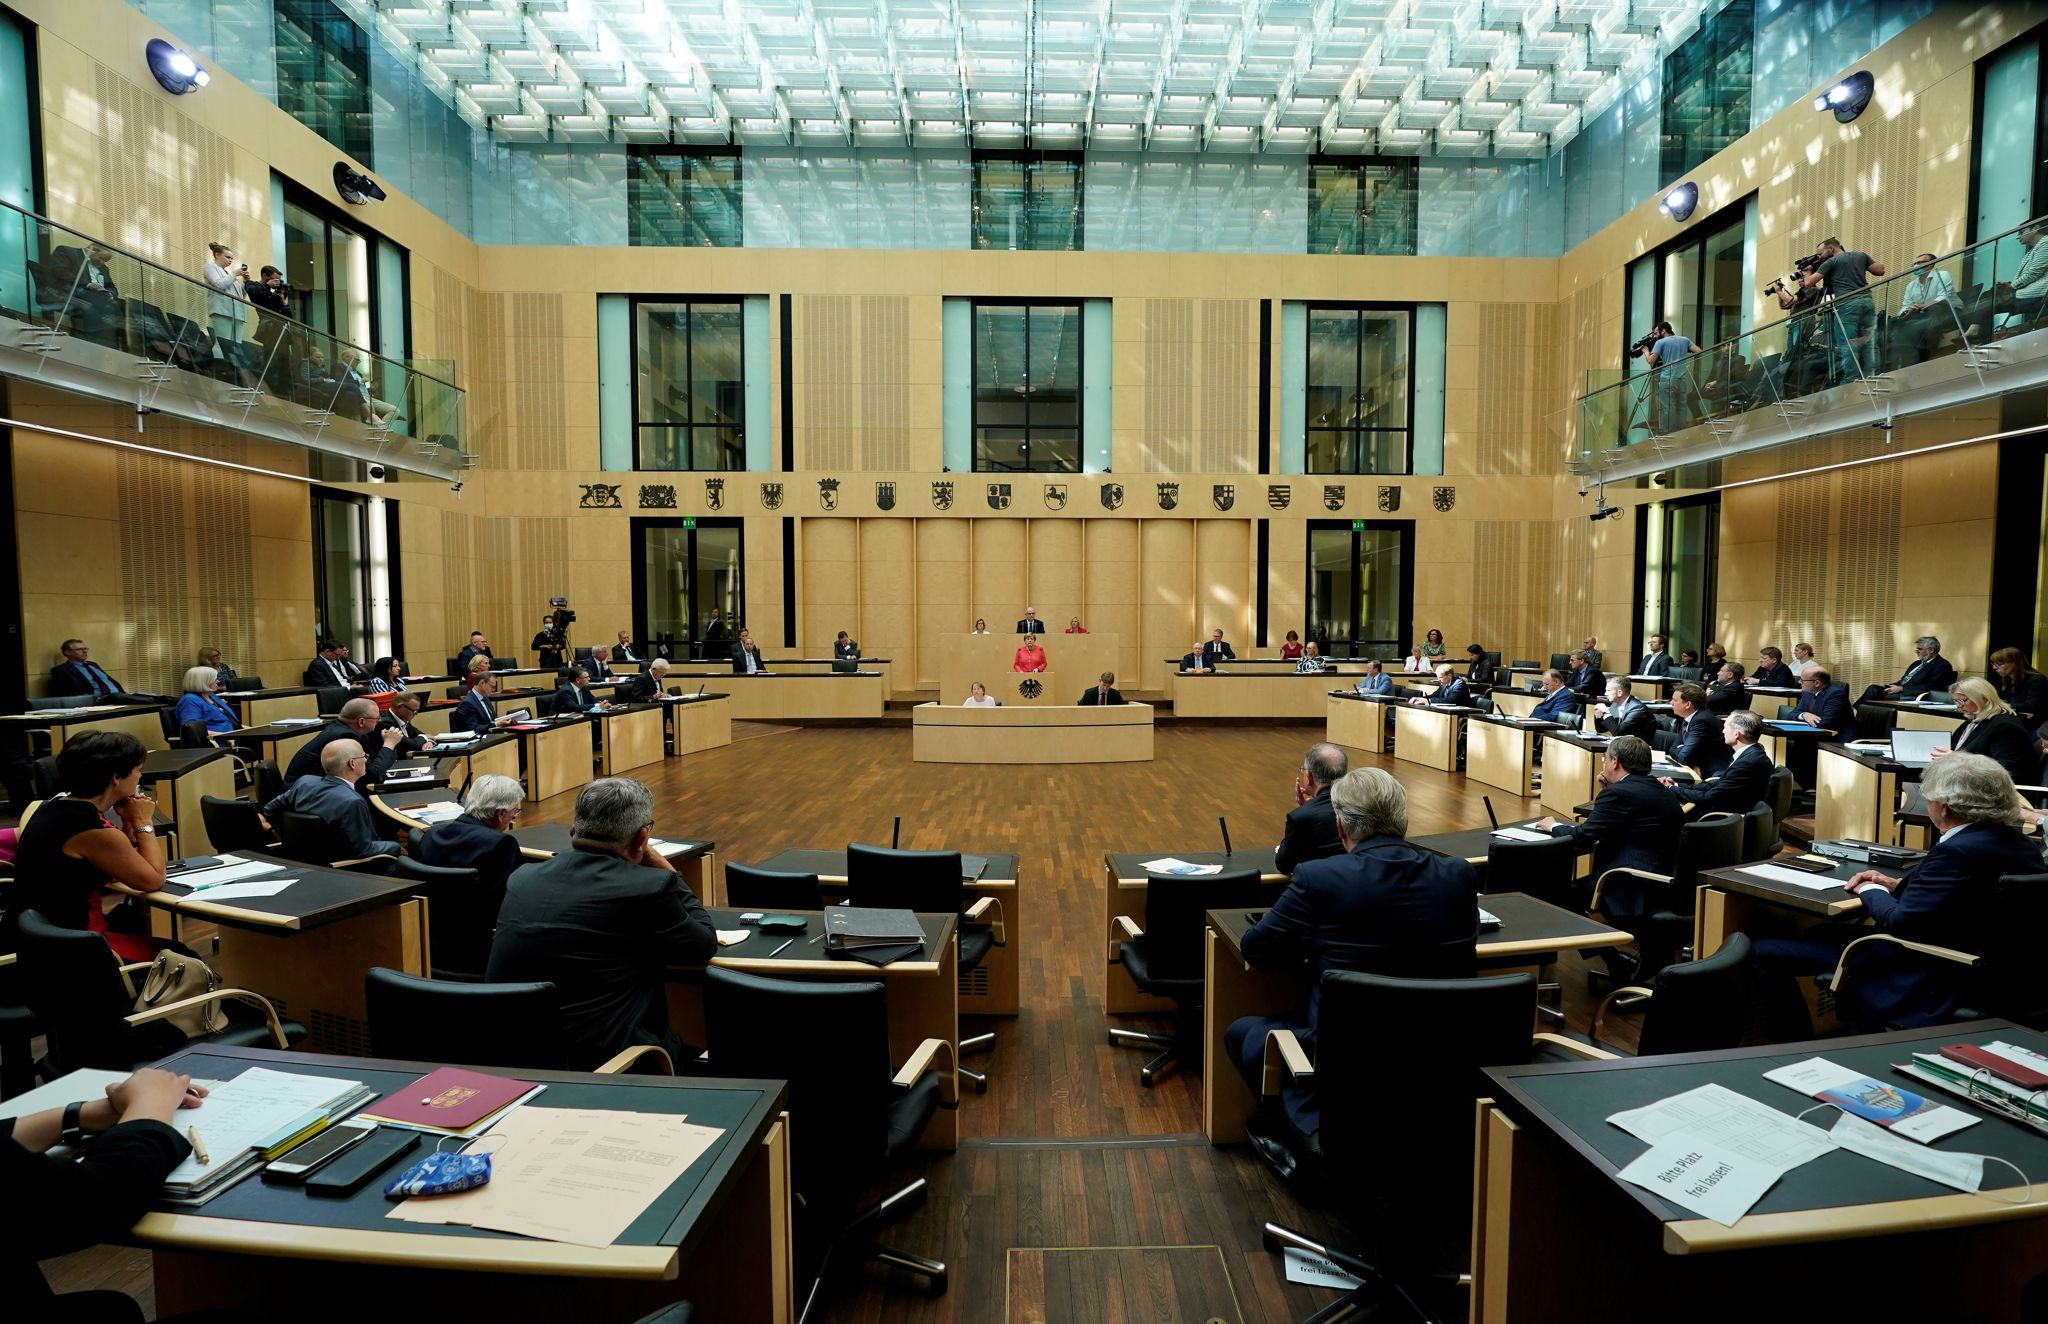 A photo of the Bundesrat chambers during the 992nd meeting of the Federal Council on July 3, 2020